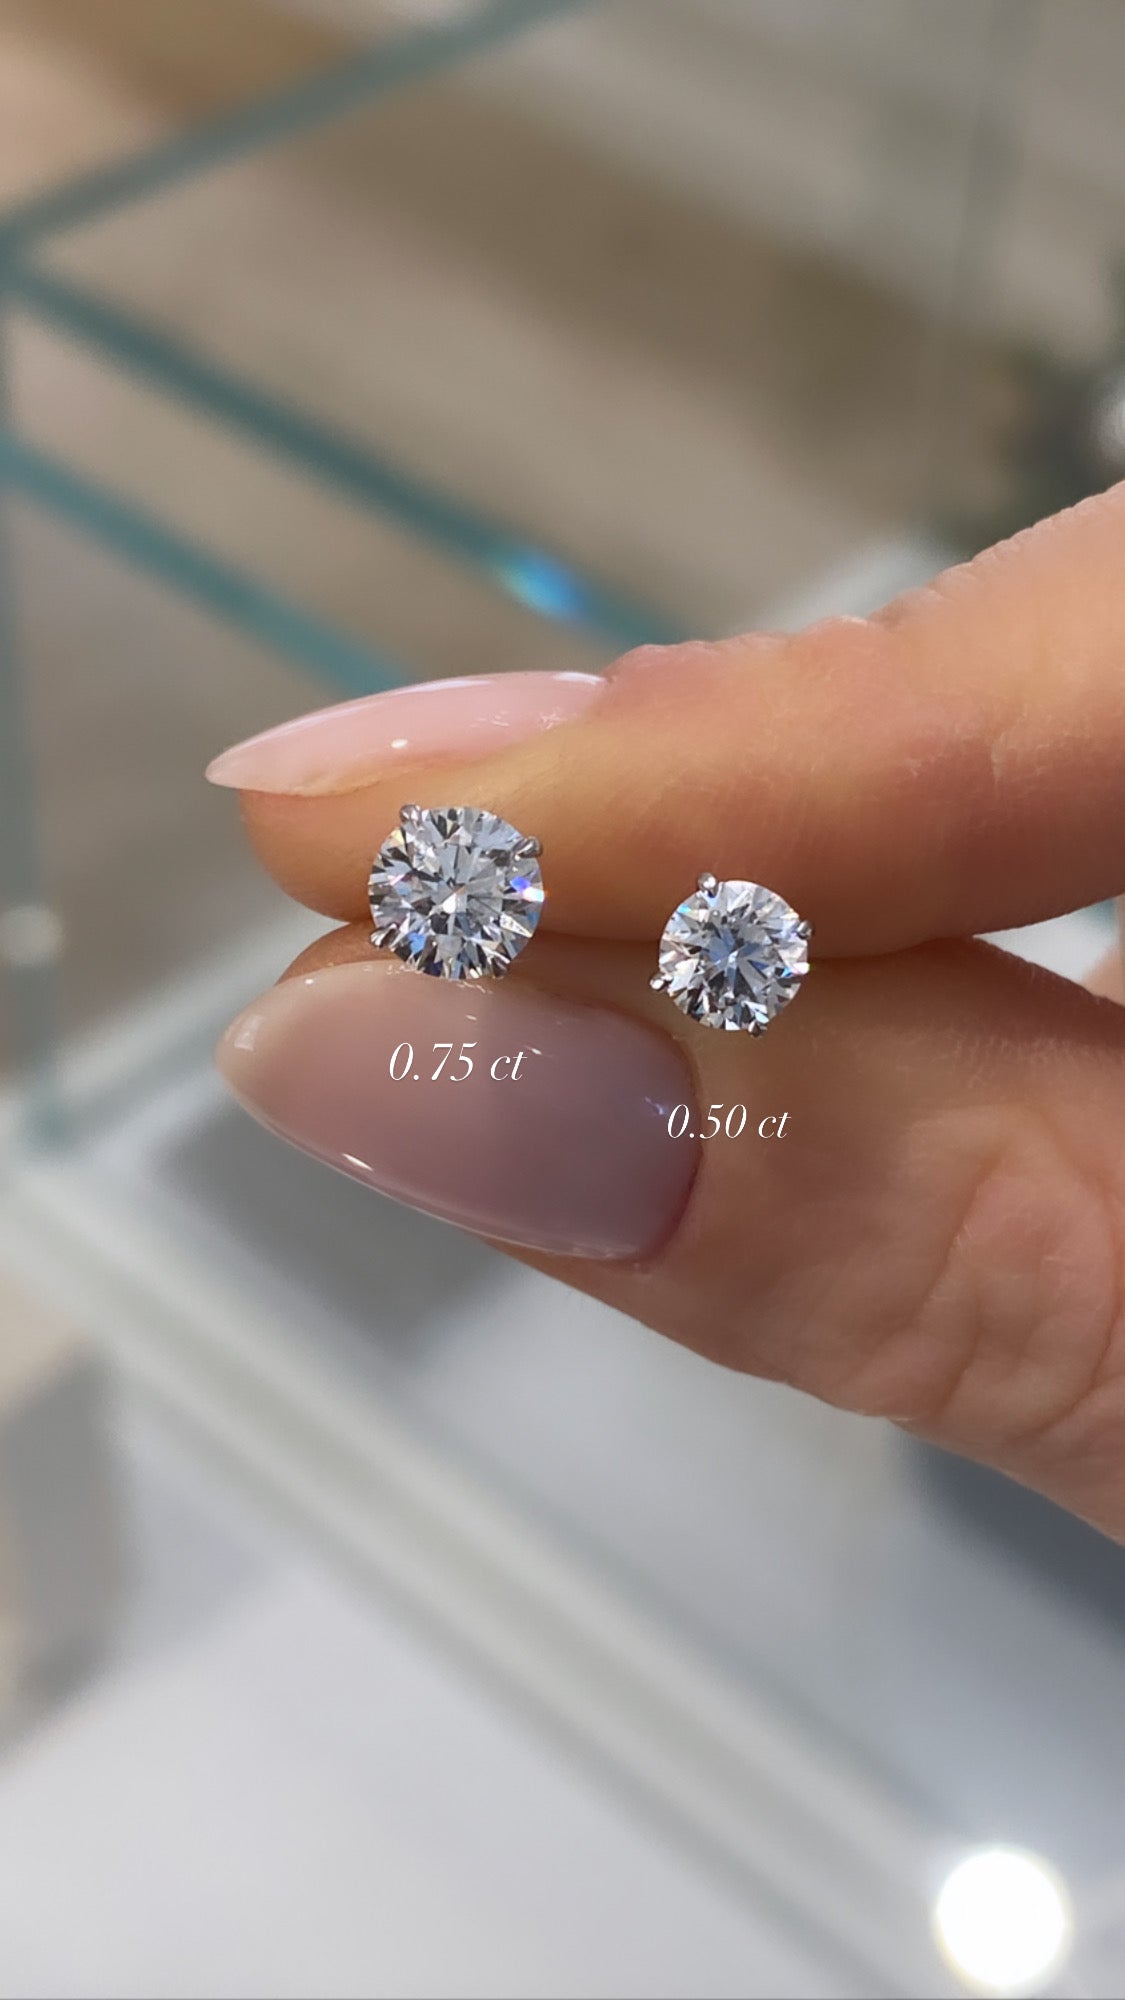 Giselle's perfect Studs (Classy Lady Size)